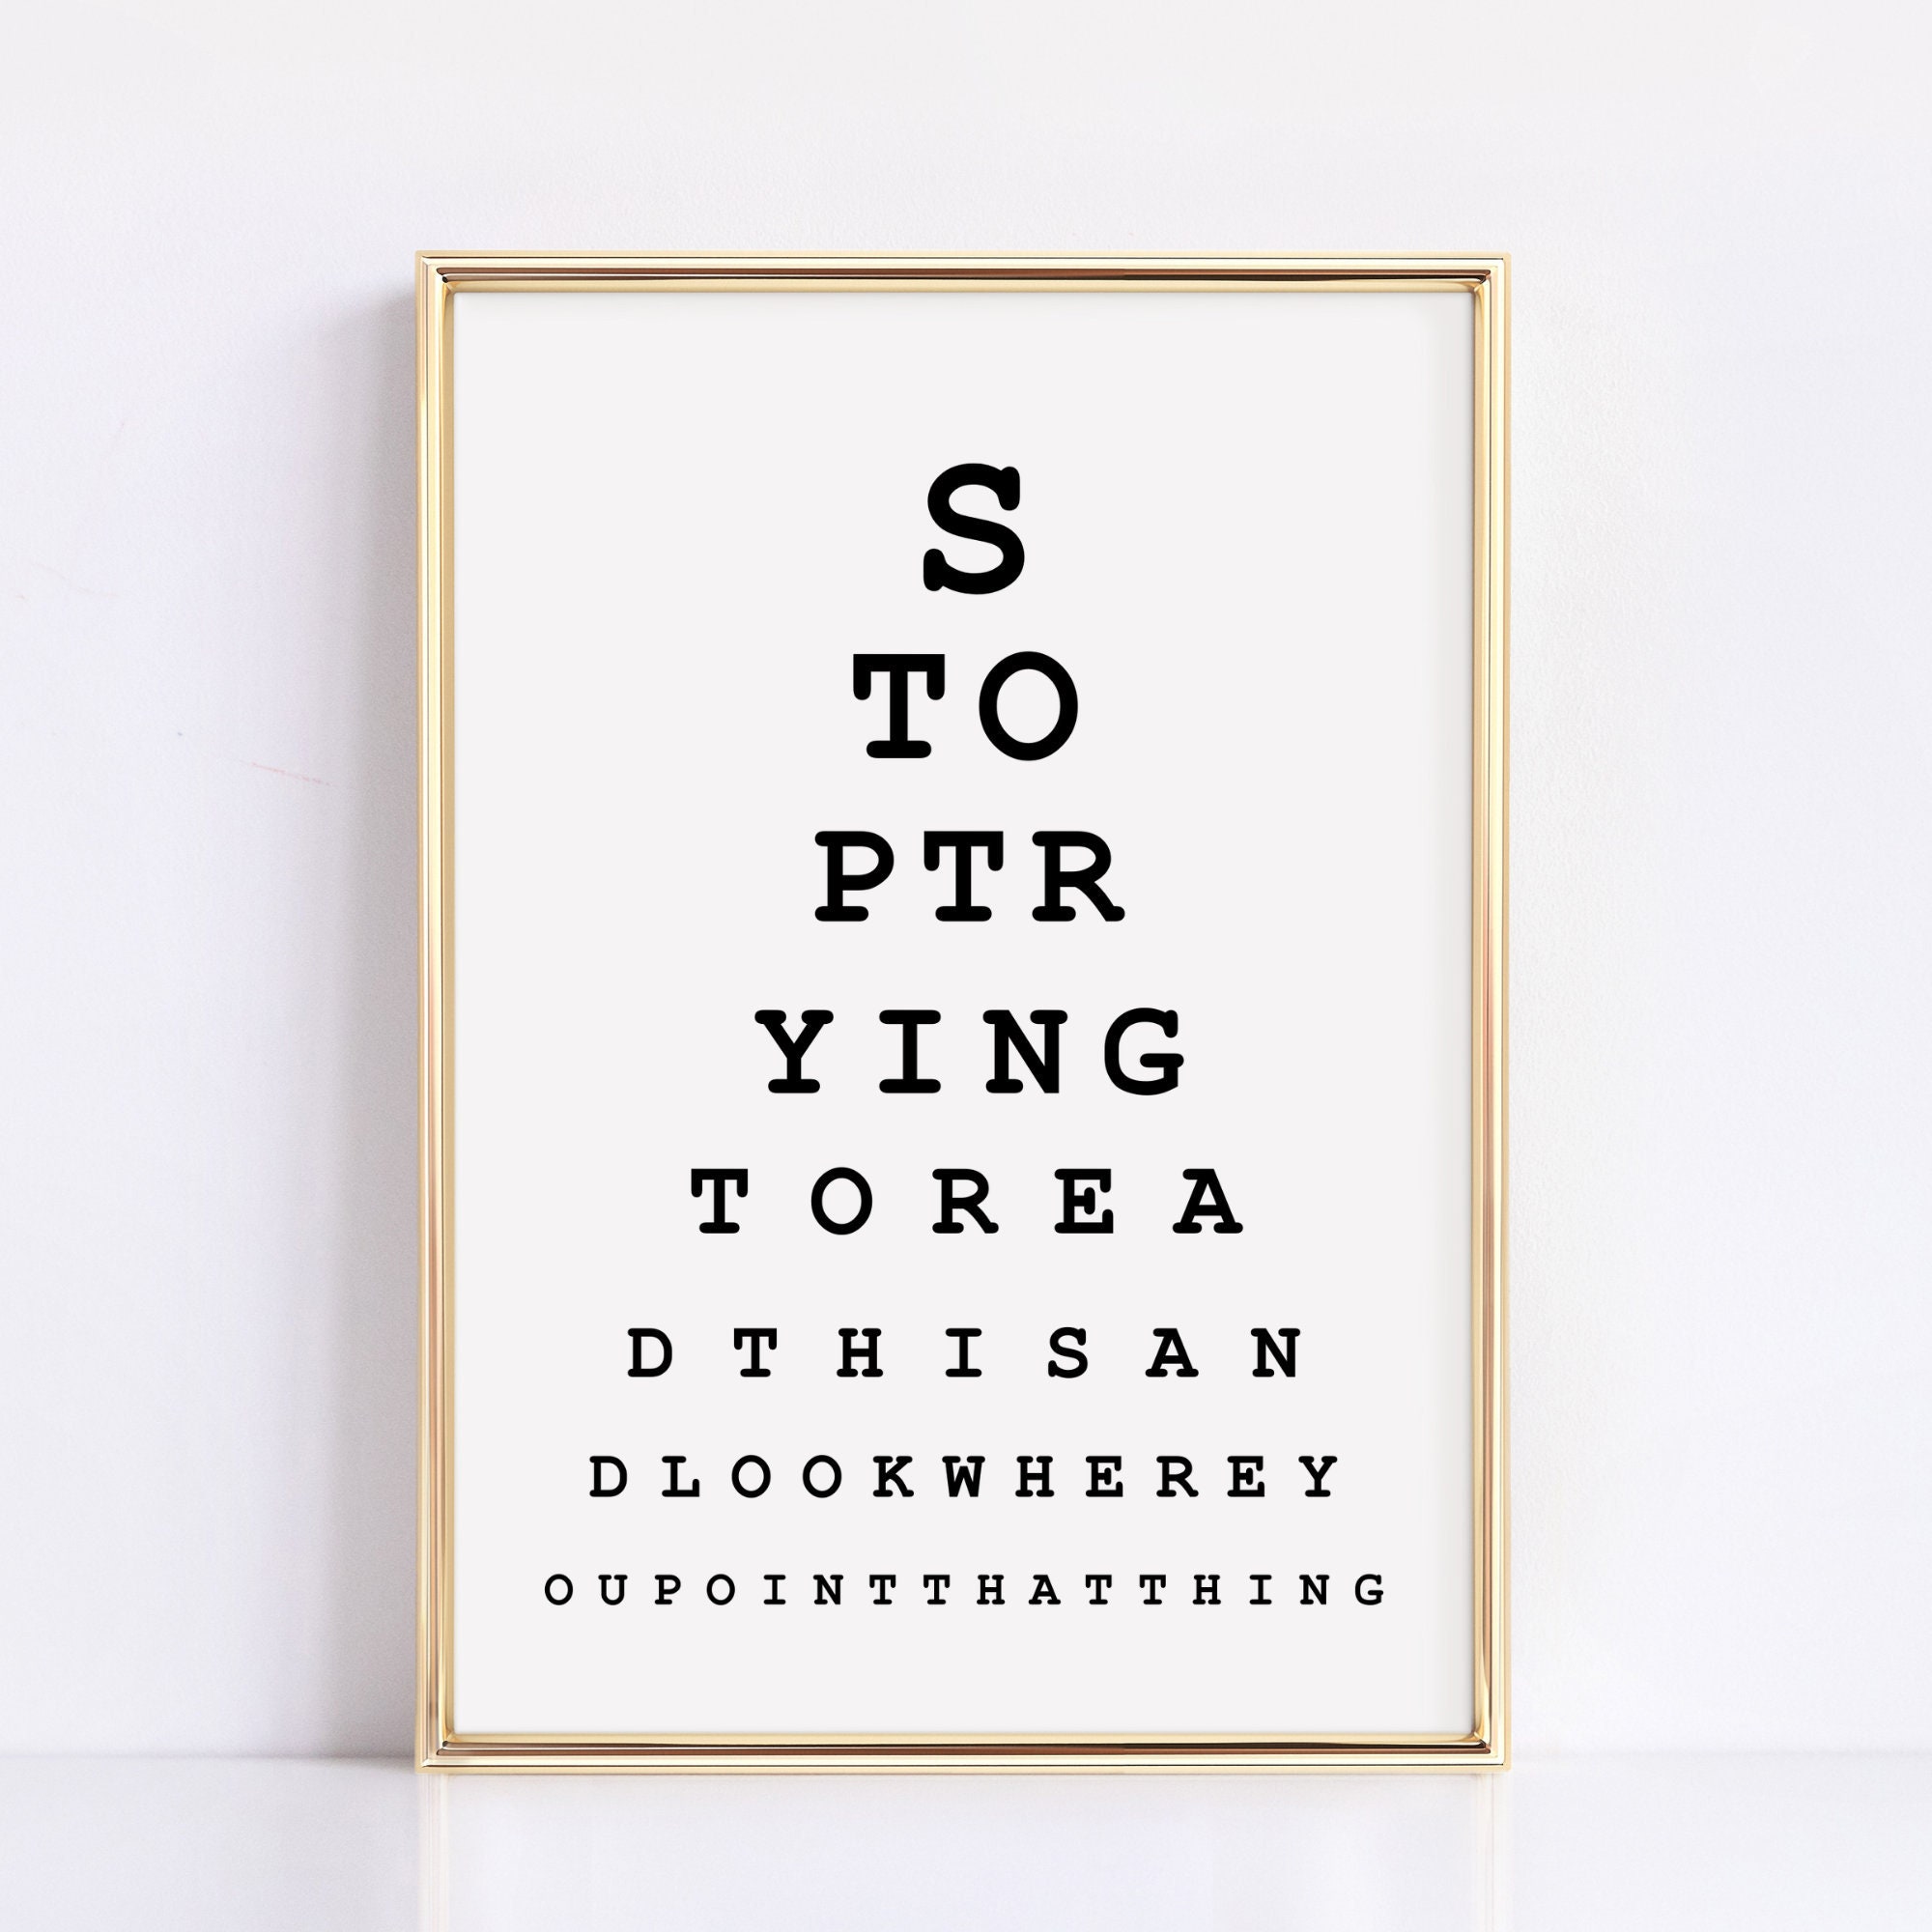 Eye Chart Crafts & Party Supplies